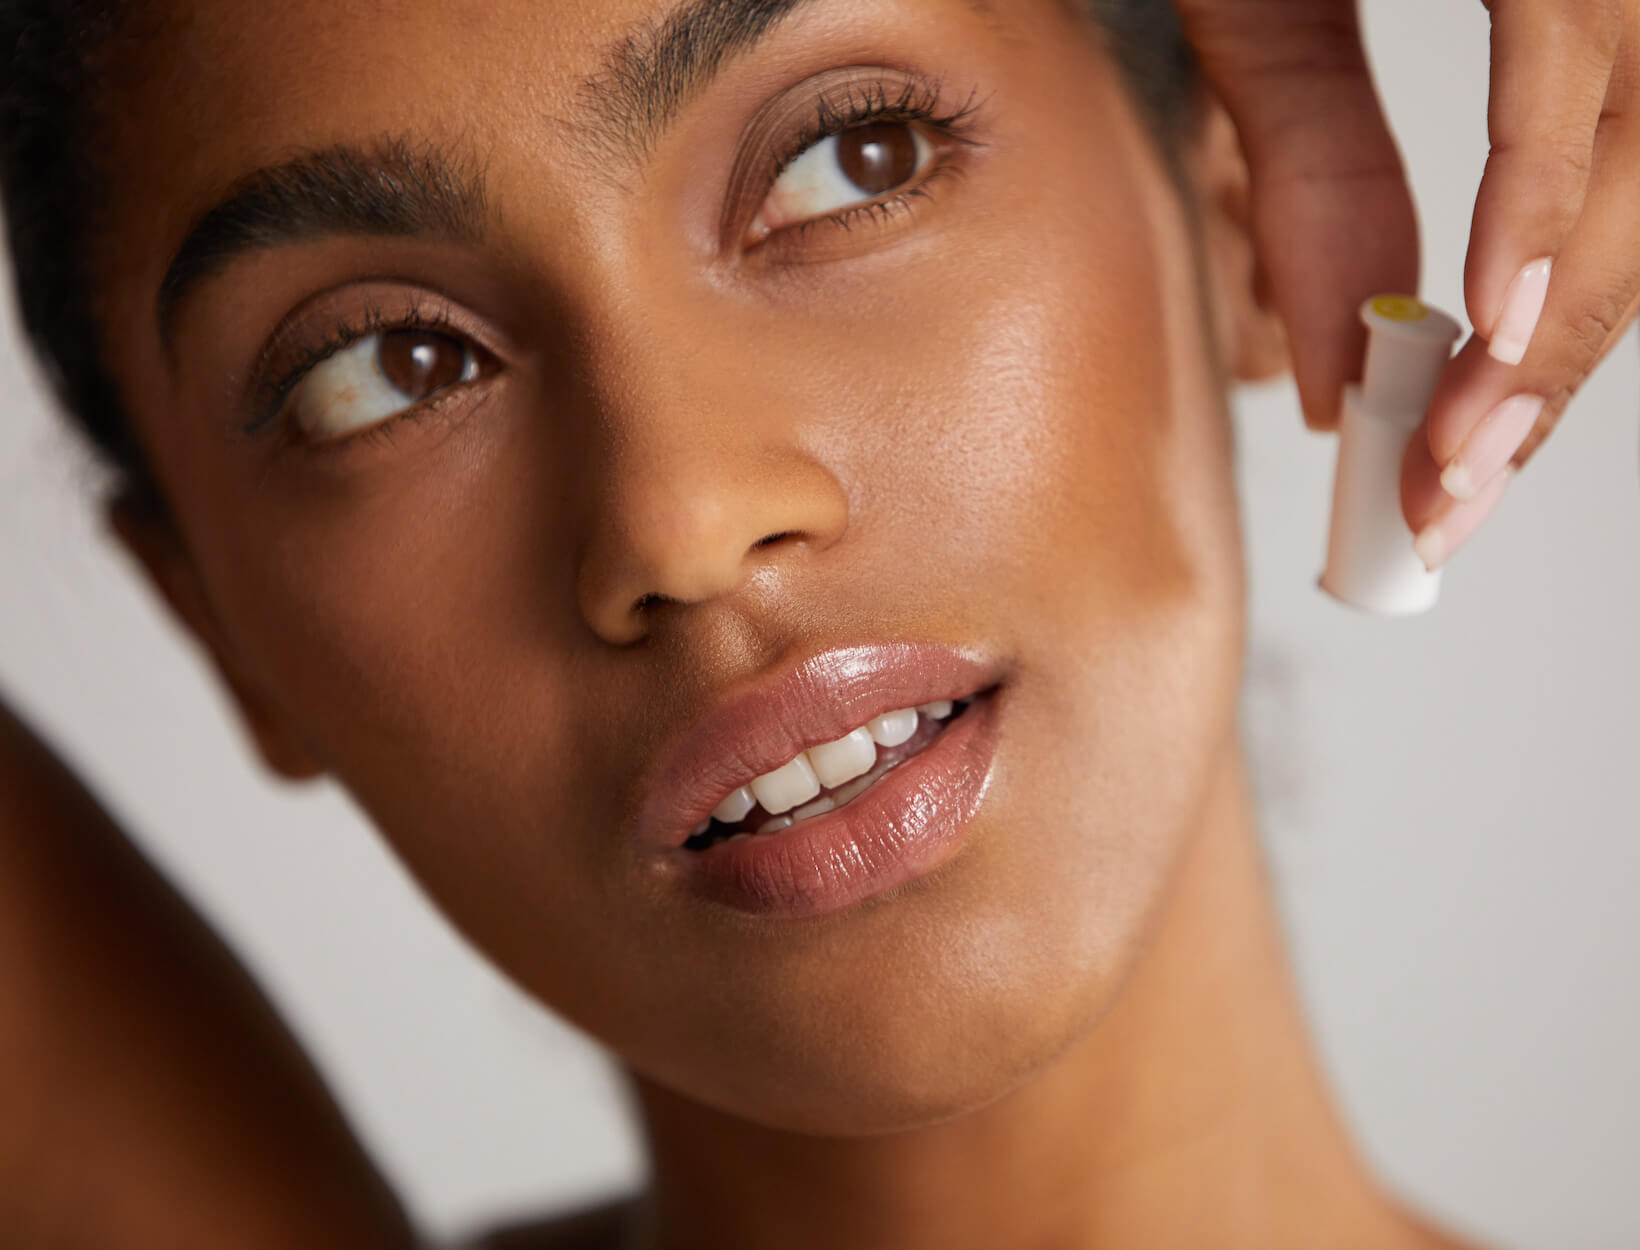 A New High-Tech Skin Trick for Winter Glow